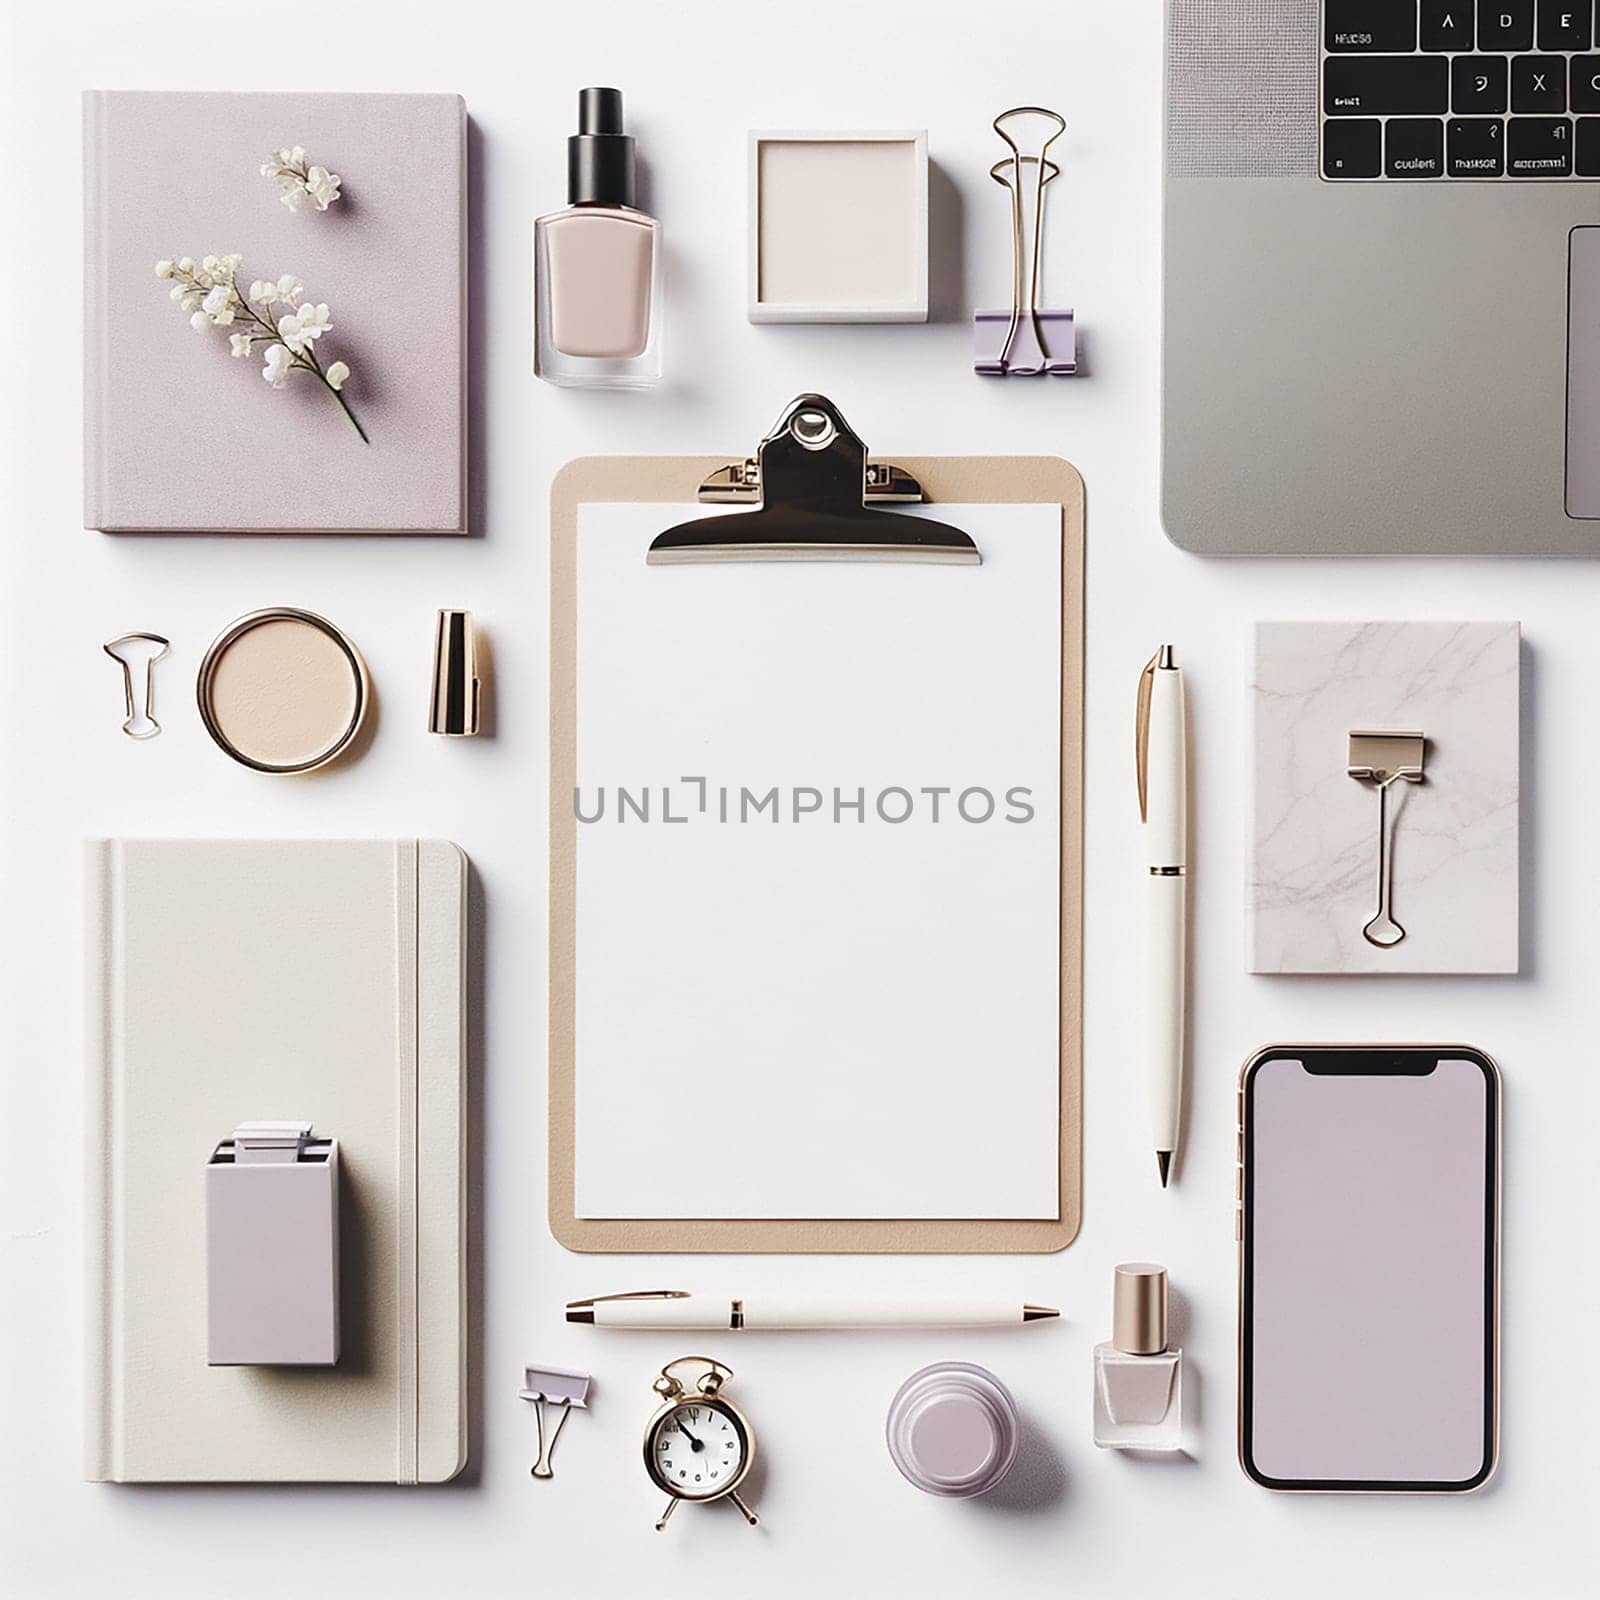 Stylish Stationery: Lilac Accents in a Minimalistic Workspace by Petrichor